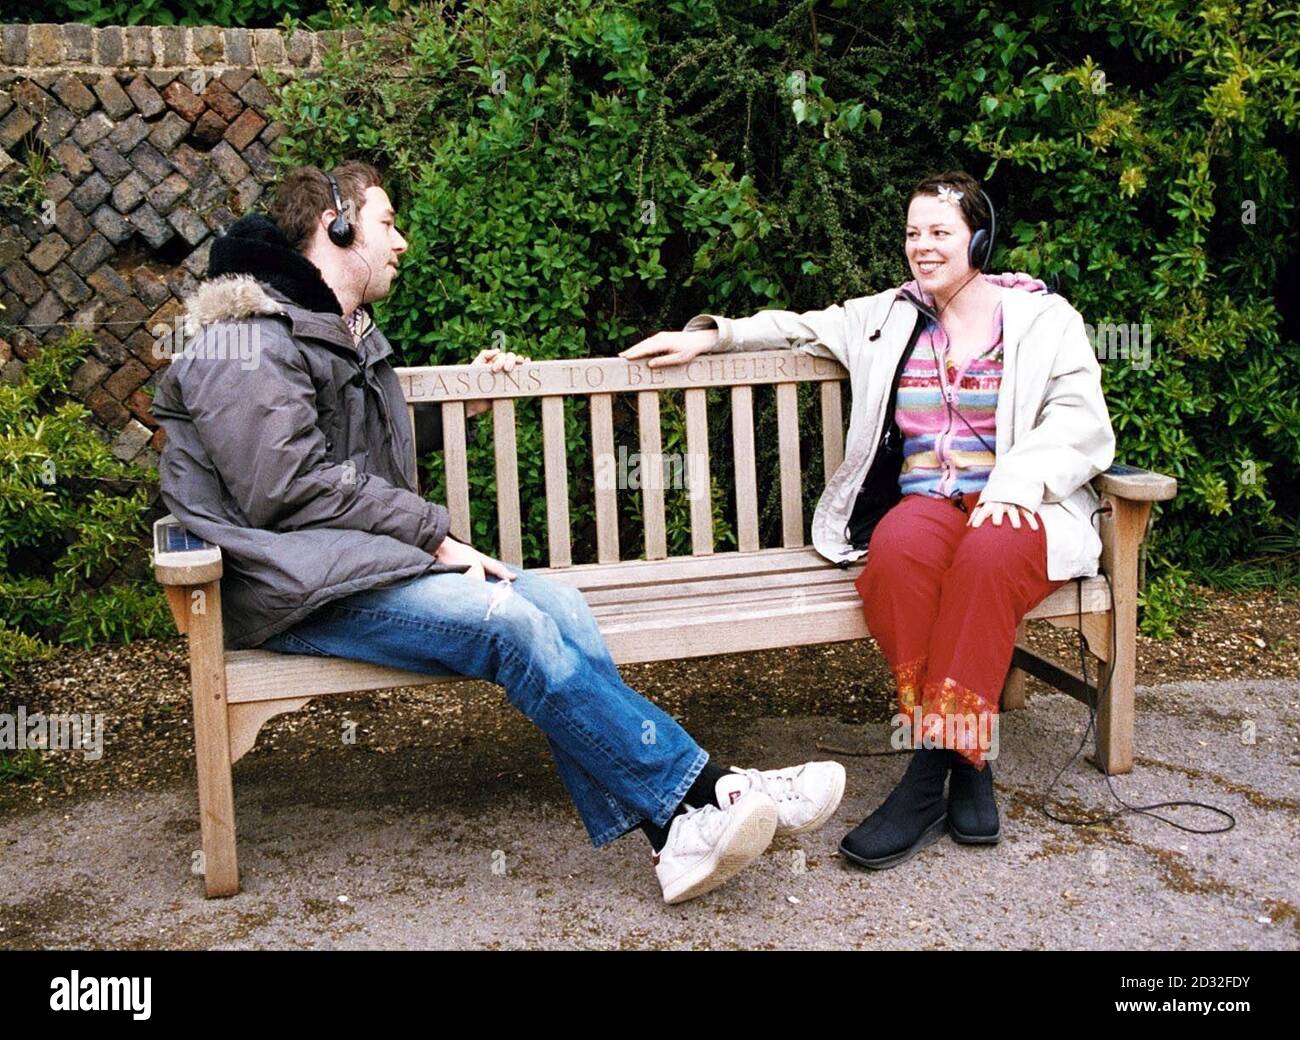 Singer Ian Dury's children, Baxter (left) and Jemima test a new solar-powered bench at Poet's Corner within the grounds of Pembroke Lodge in Richmond Park.   *  The bench donated by Dury's family and designed by Mil Stricevic will enable people to listen to the music of Ian Dury whilst enjoying the views of the park. Stock Photo